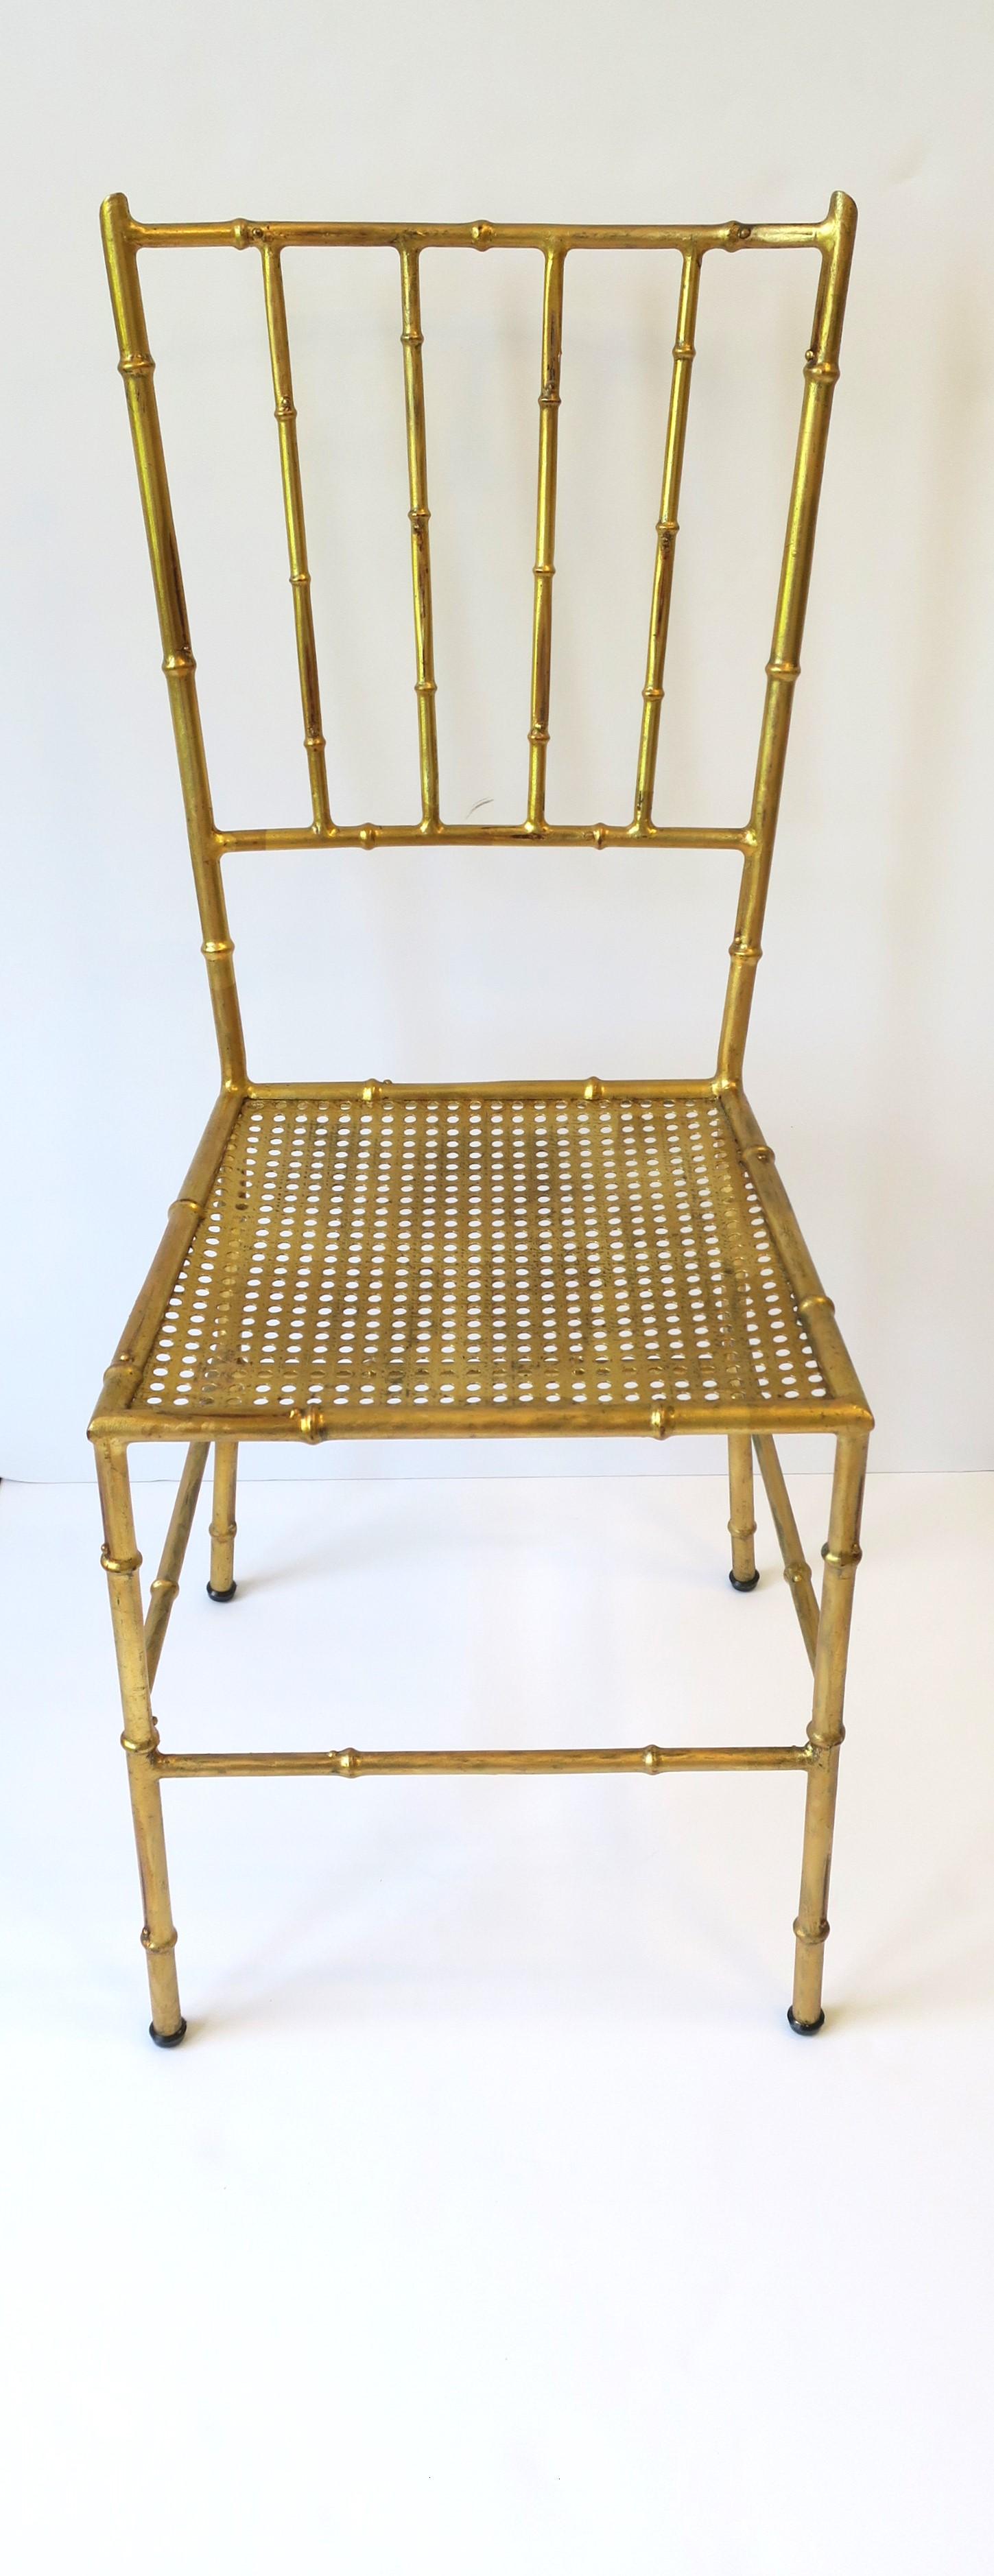 Mid-20th Century Italian Gold Metal Cane and Bamboo-Esque Desk, Dining or Side Chair For Sale